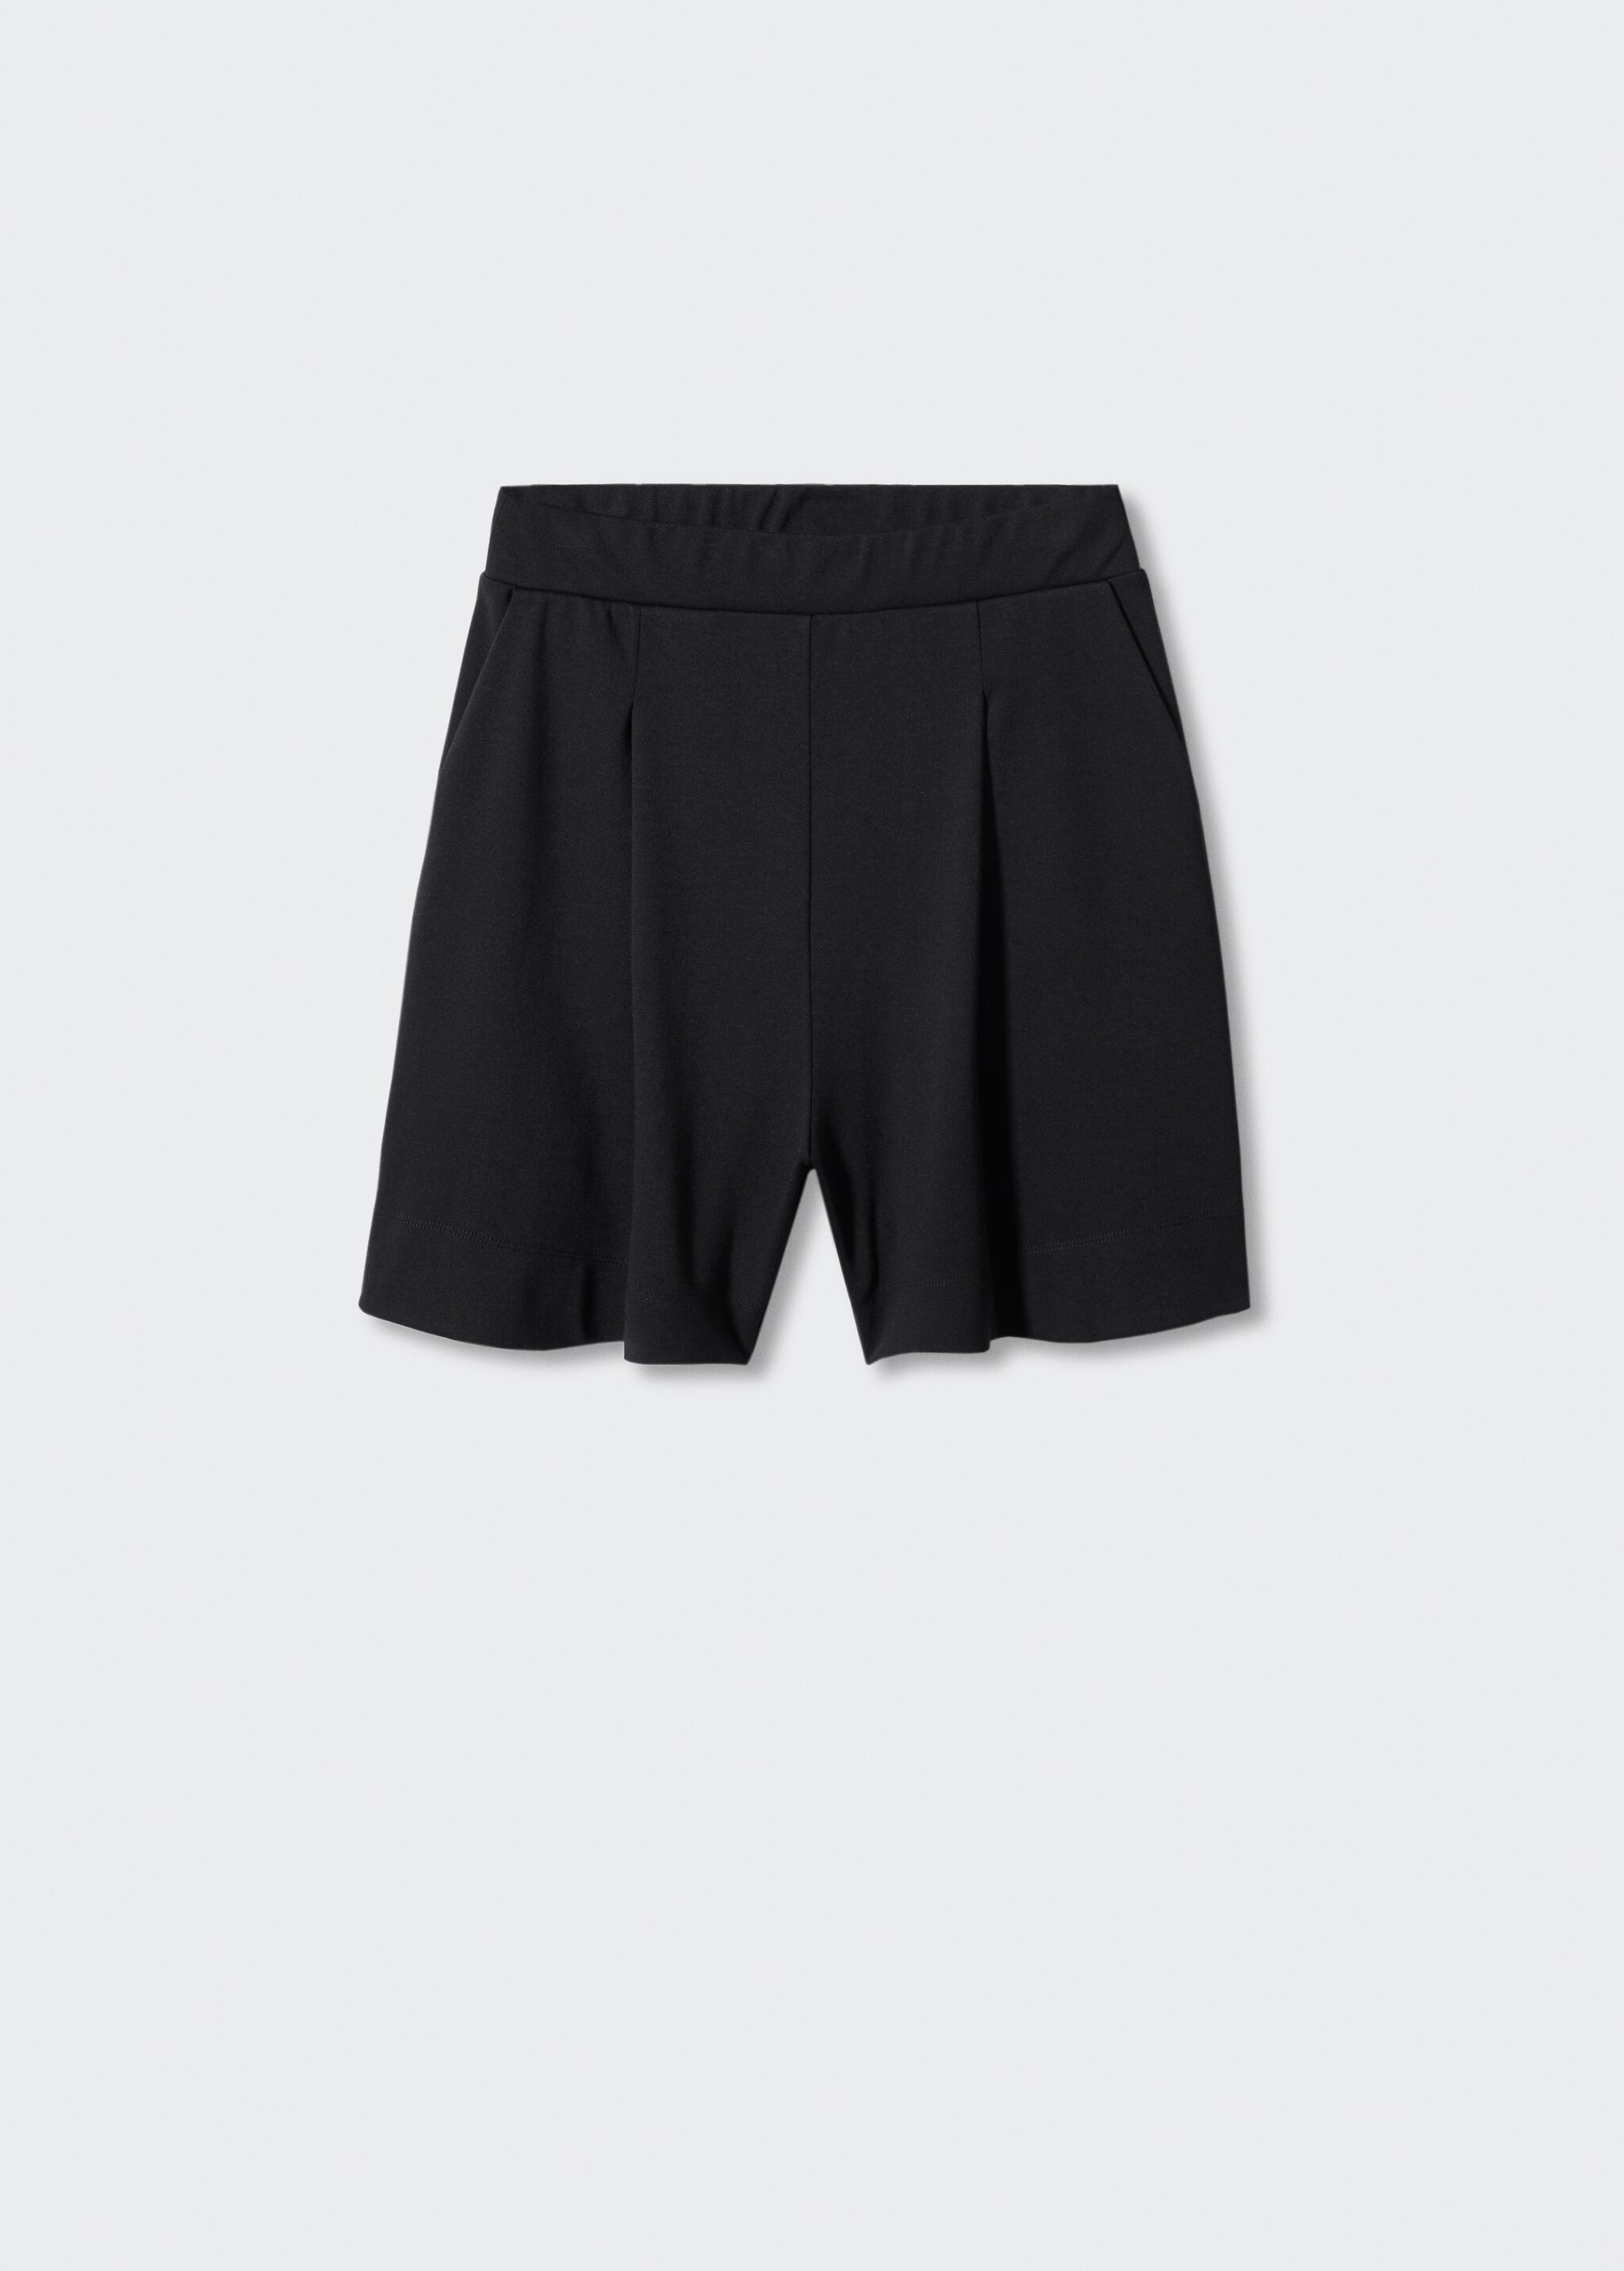 Pleated Bermuda shorts - Article without model